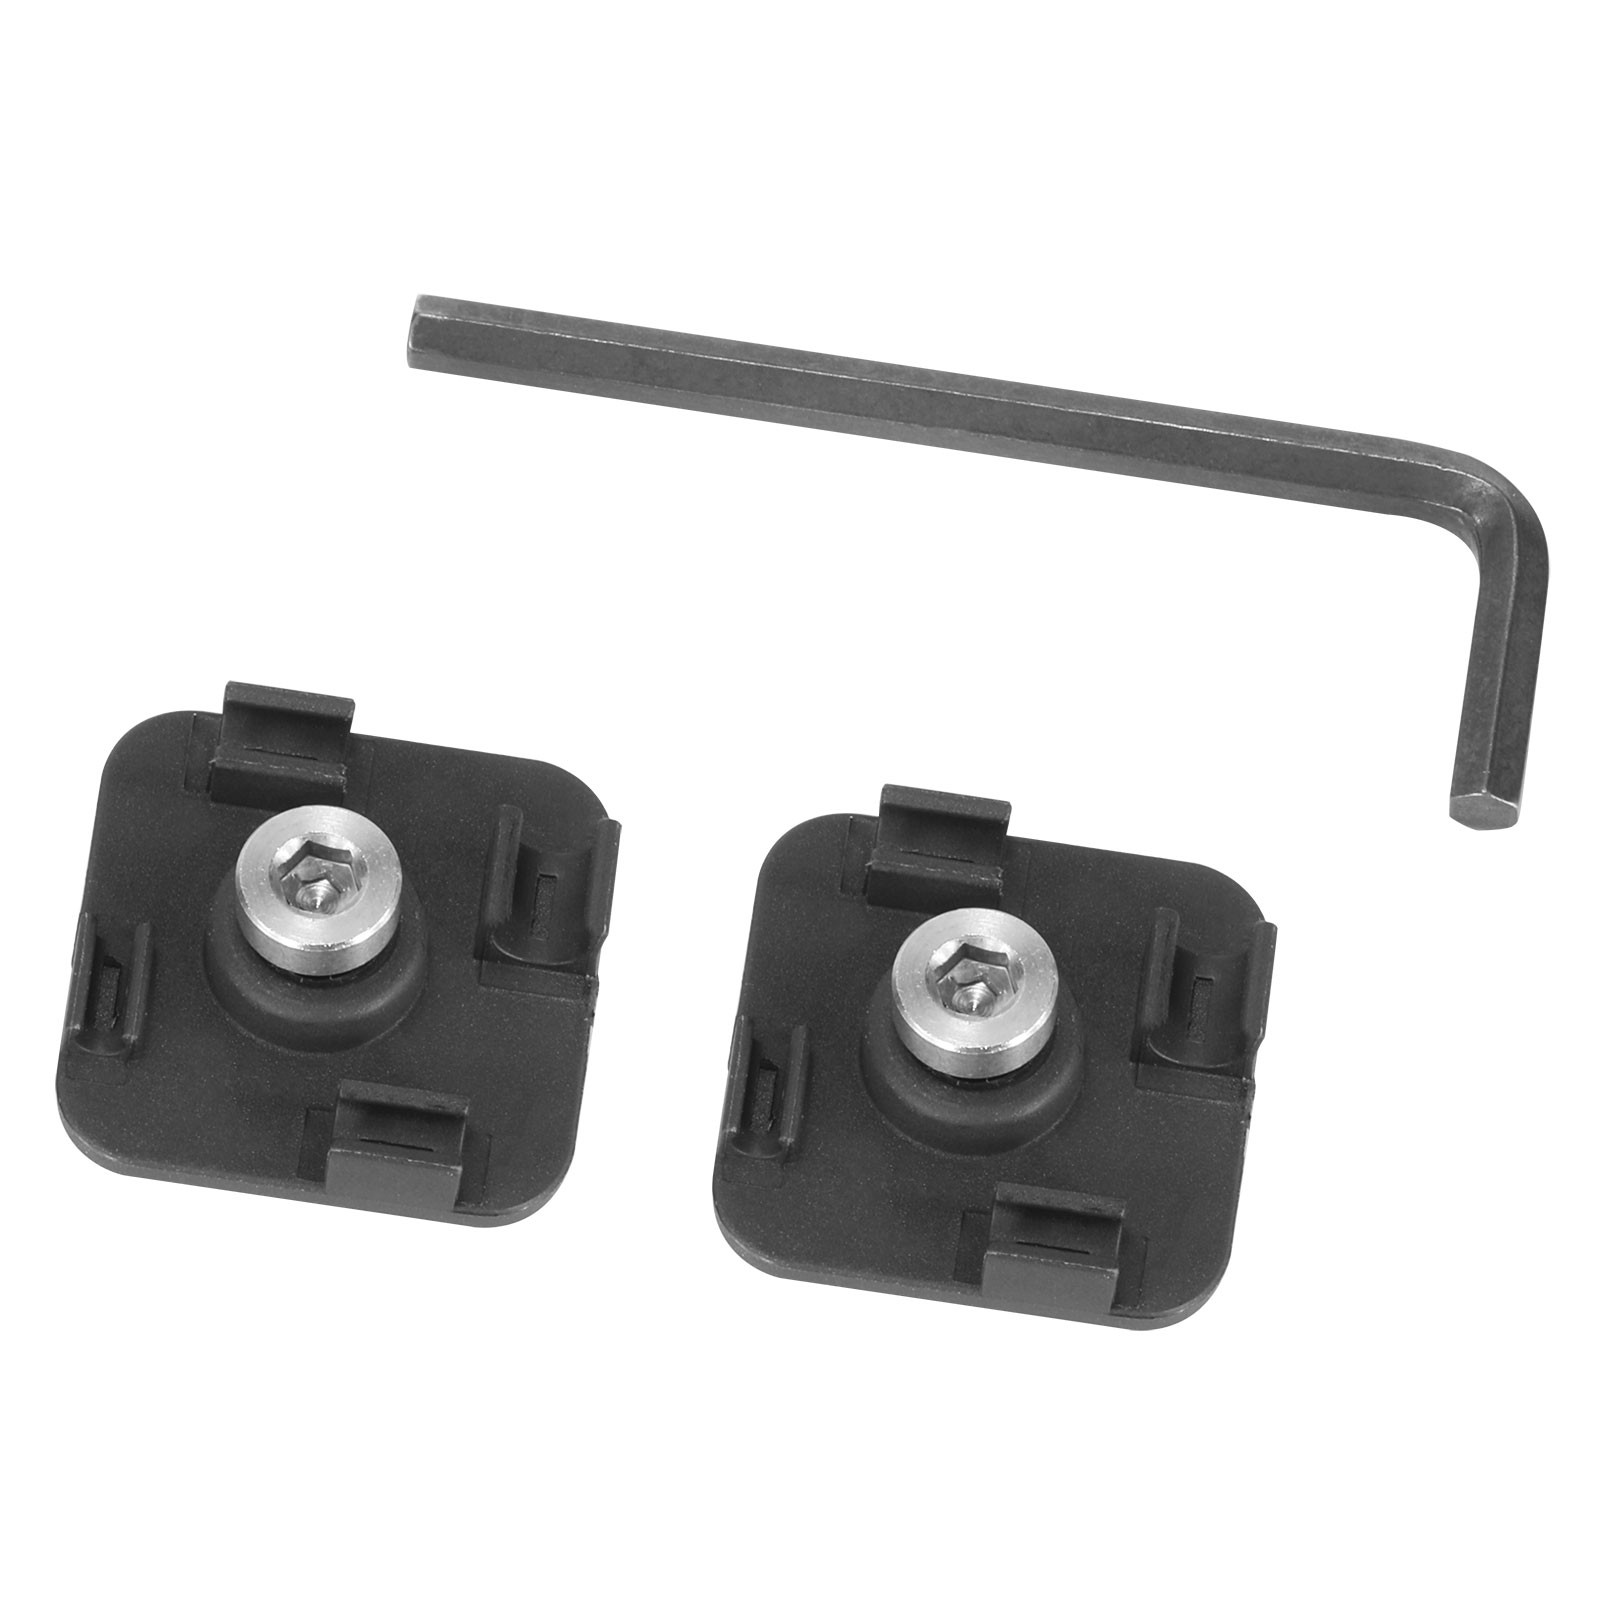 SmallRig Mini Cable Clamp for Tethering Cables (2 pcs) BSC2335